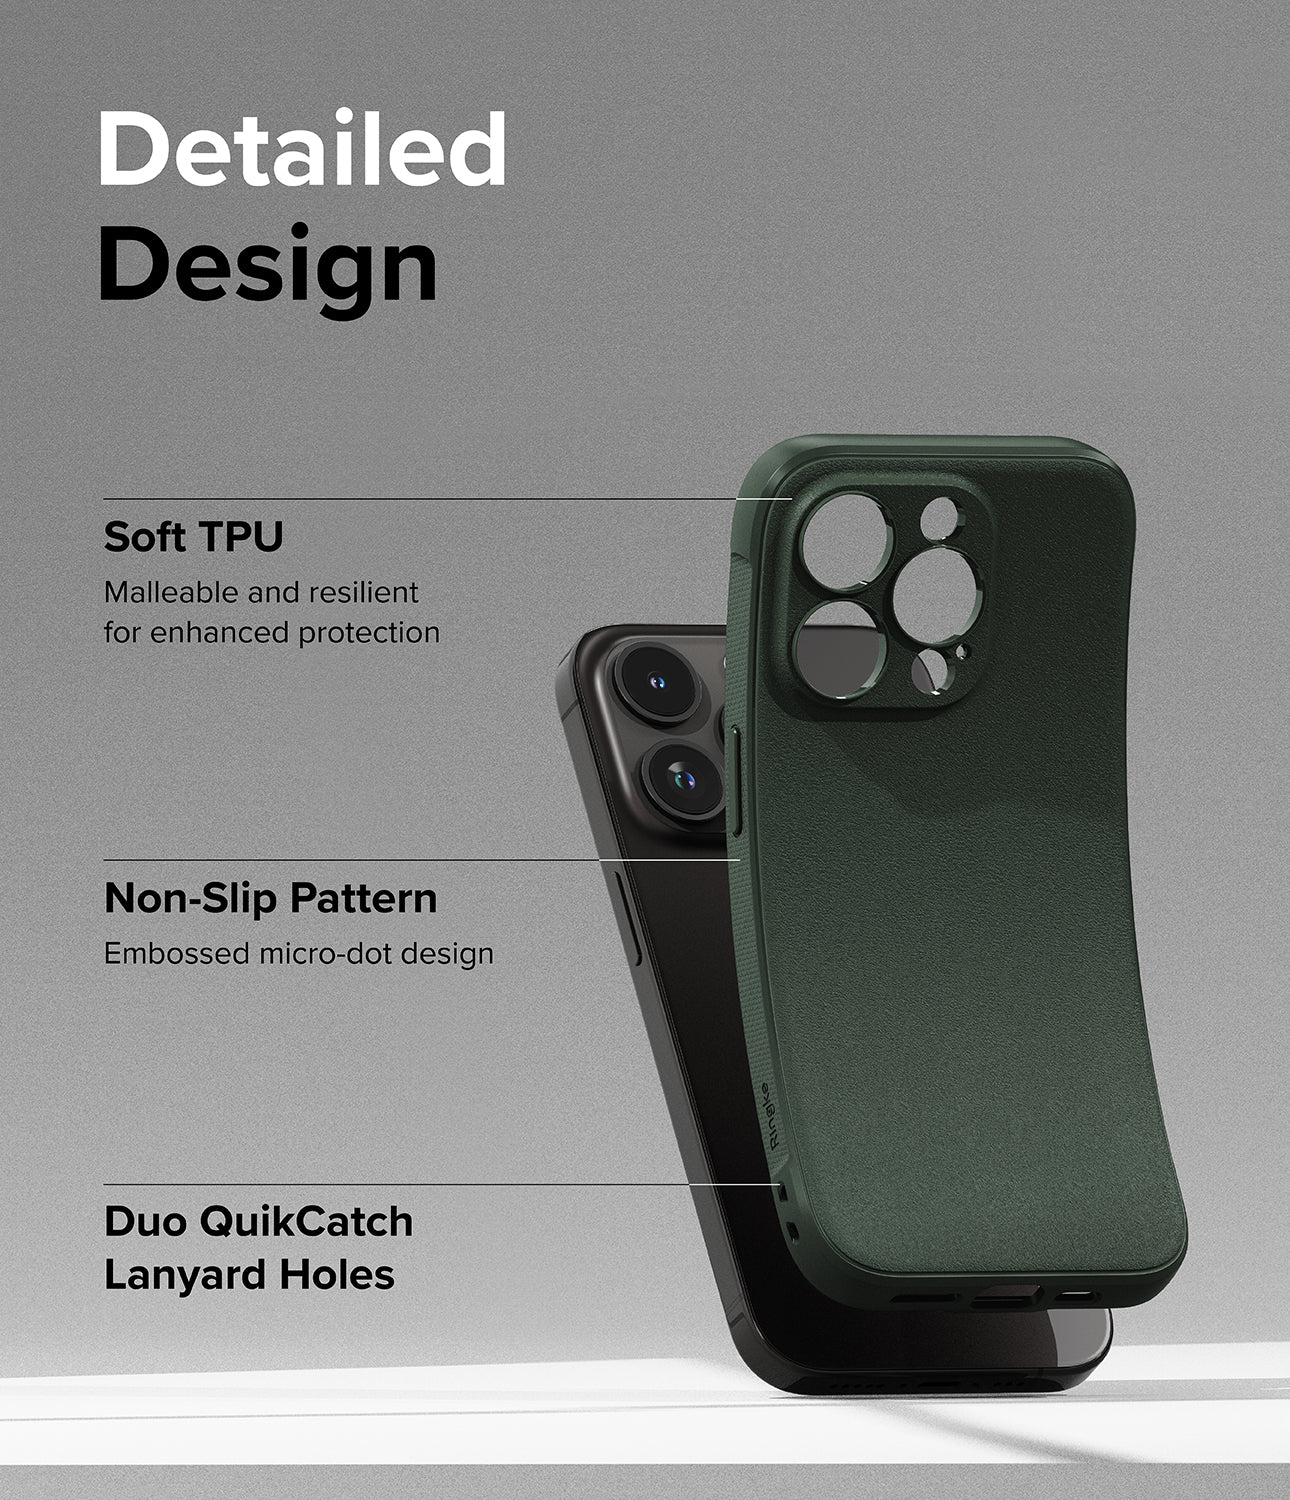 iPhone 15 Pro Case | Onyx - Dark Green - Detailed Design. Malleable and resilient for enhanced protection with Soft TPU. Embossed micro-dot design with Non-Slip Pattern. Duo QuikCatch Lanyard Holes.